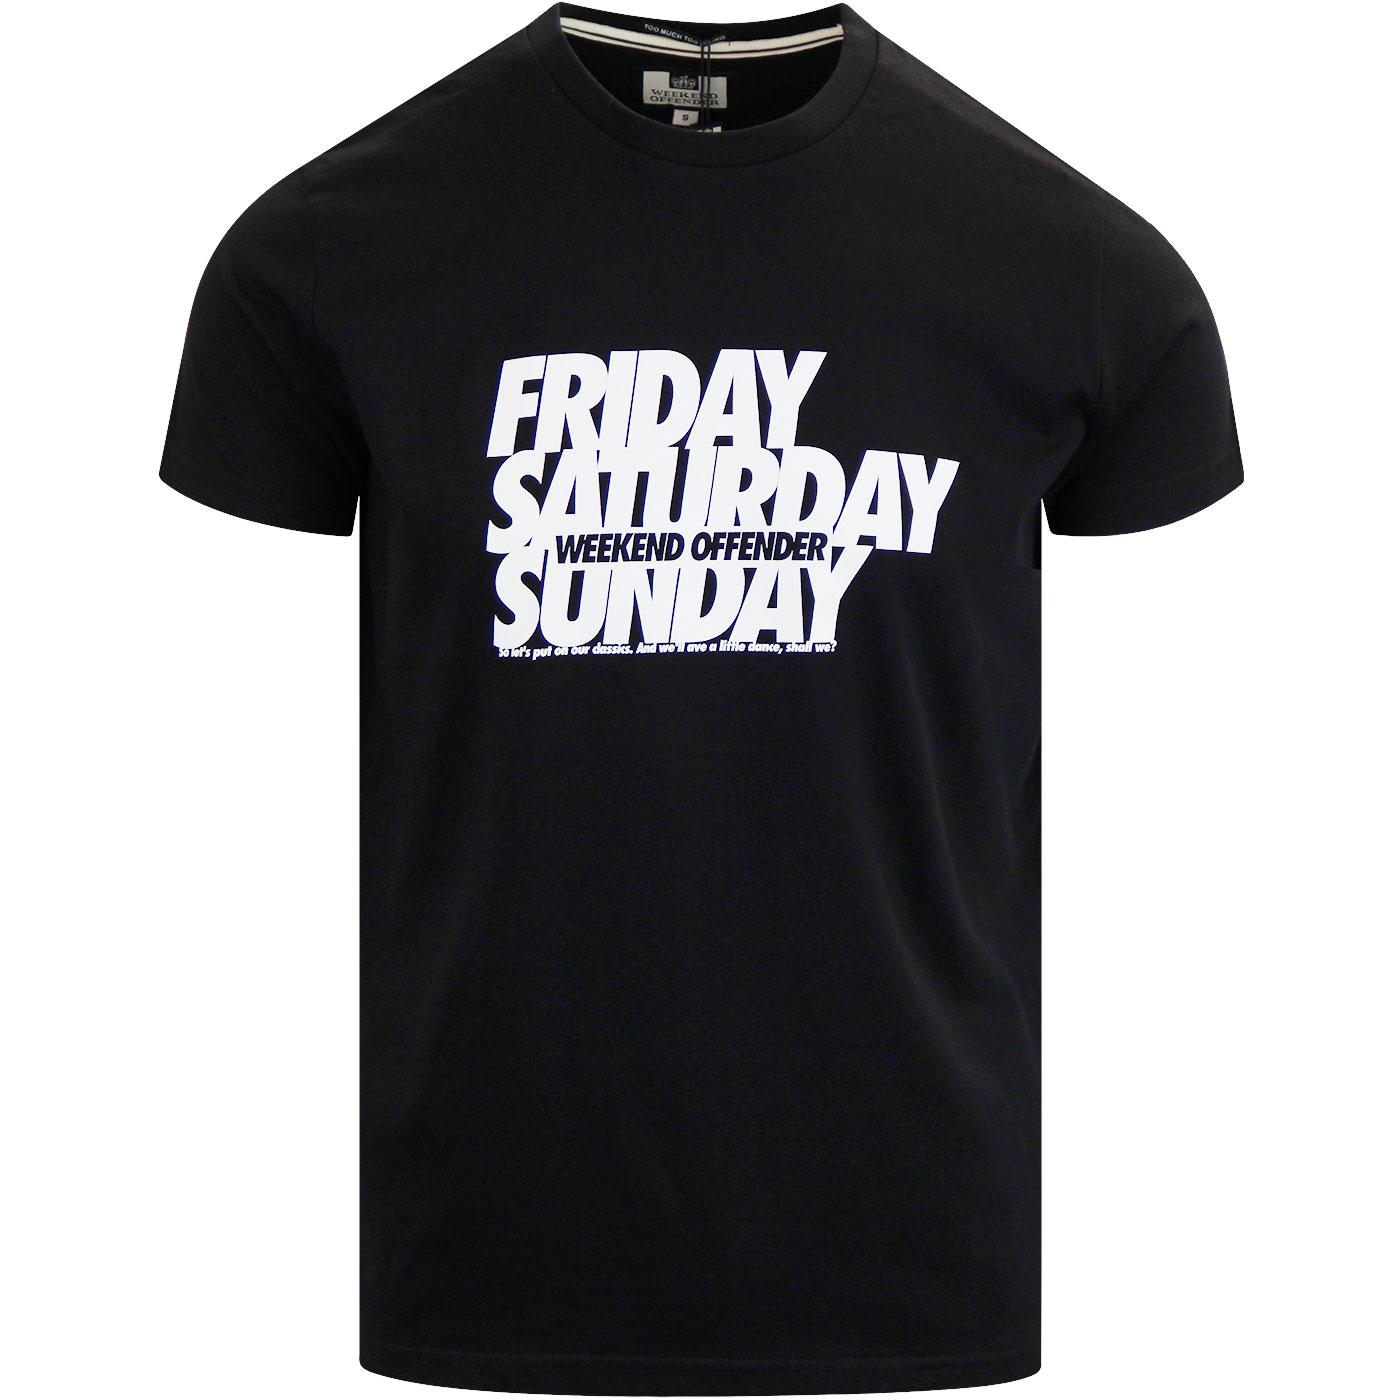 Friday Saturday Sunday WEEKEND OFFENDER Bubble Tee